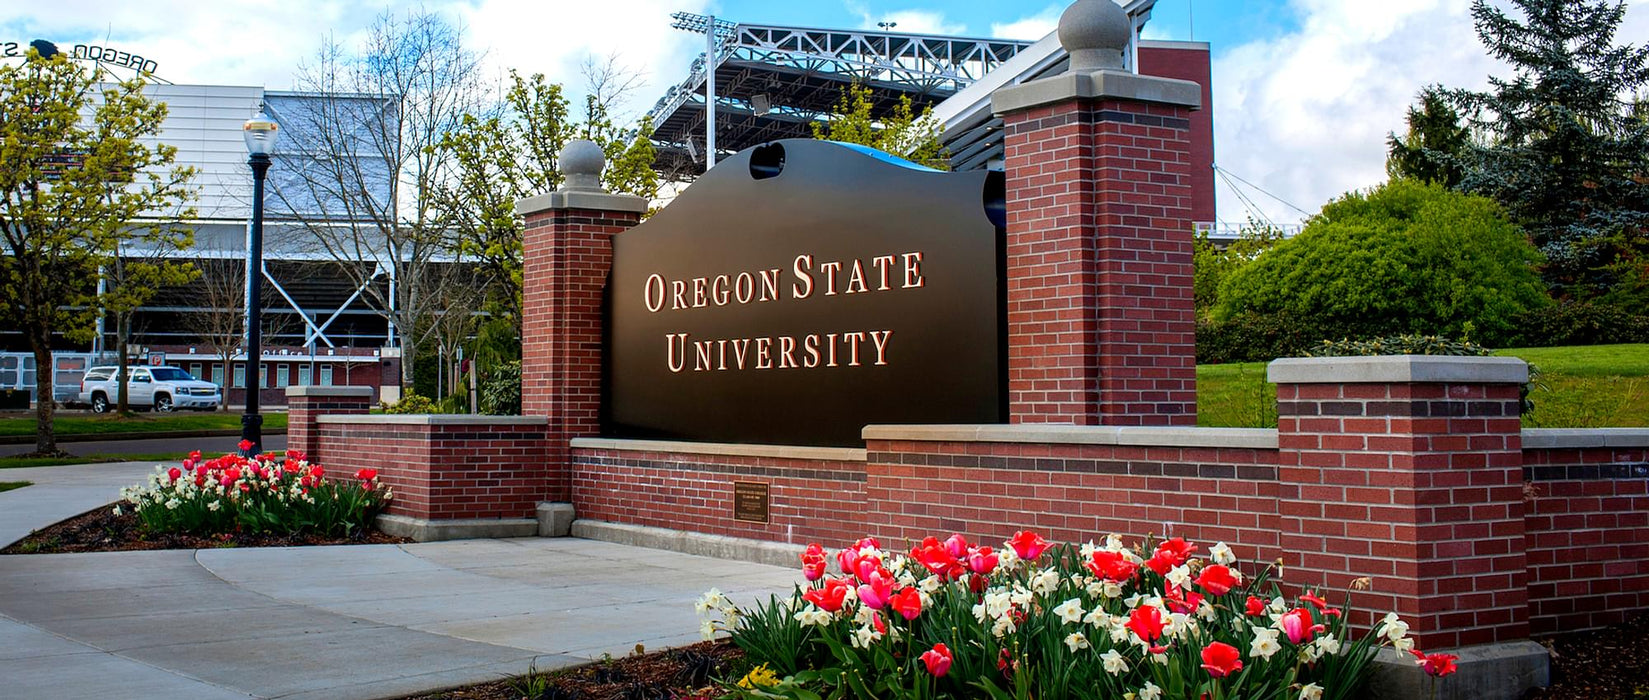 Master of Engineering - Environmental Engineering at Oregon State University - Corvallis: Tuition: $29,700.00 USD/year (Scholarship Available)